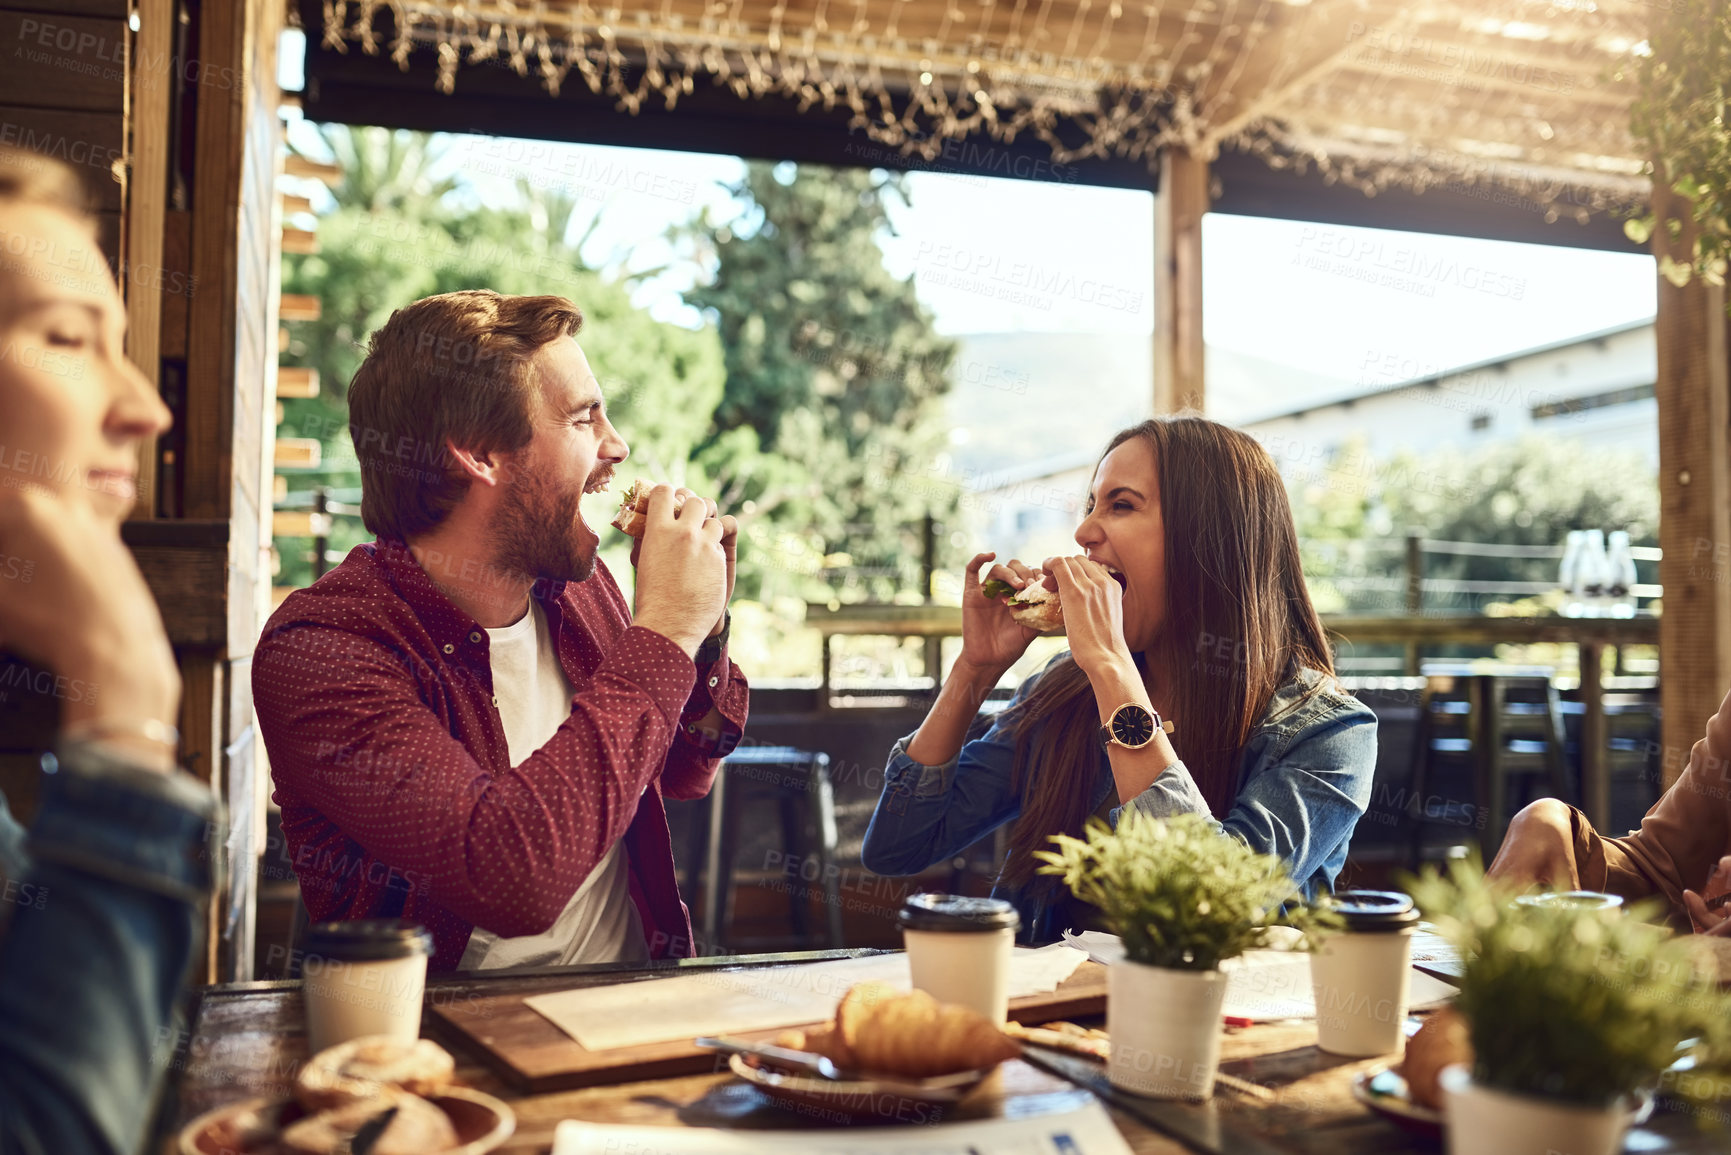 Buy stock photo Cropped shot of an affectionate young couple biting into their sandwiches while out for lunch at a cafe with friends